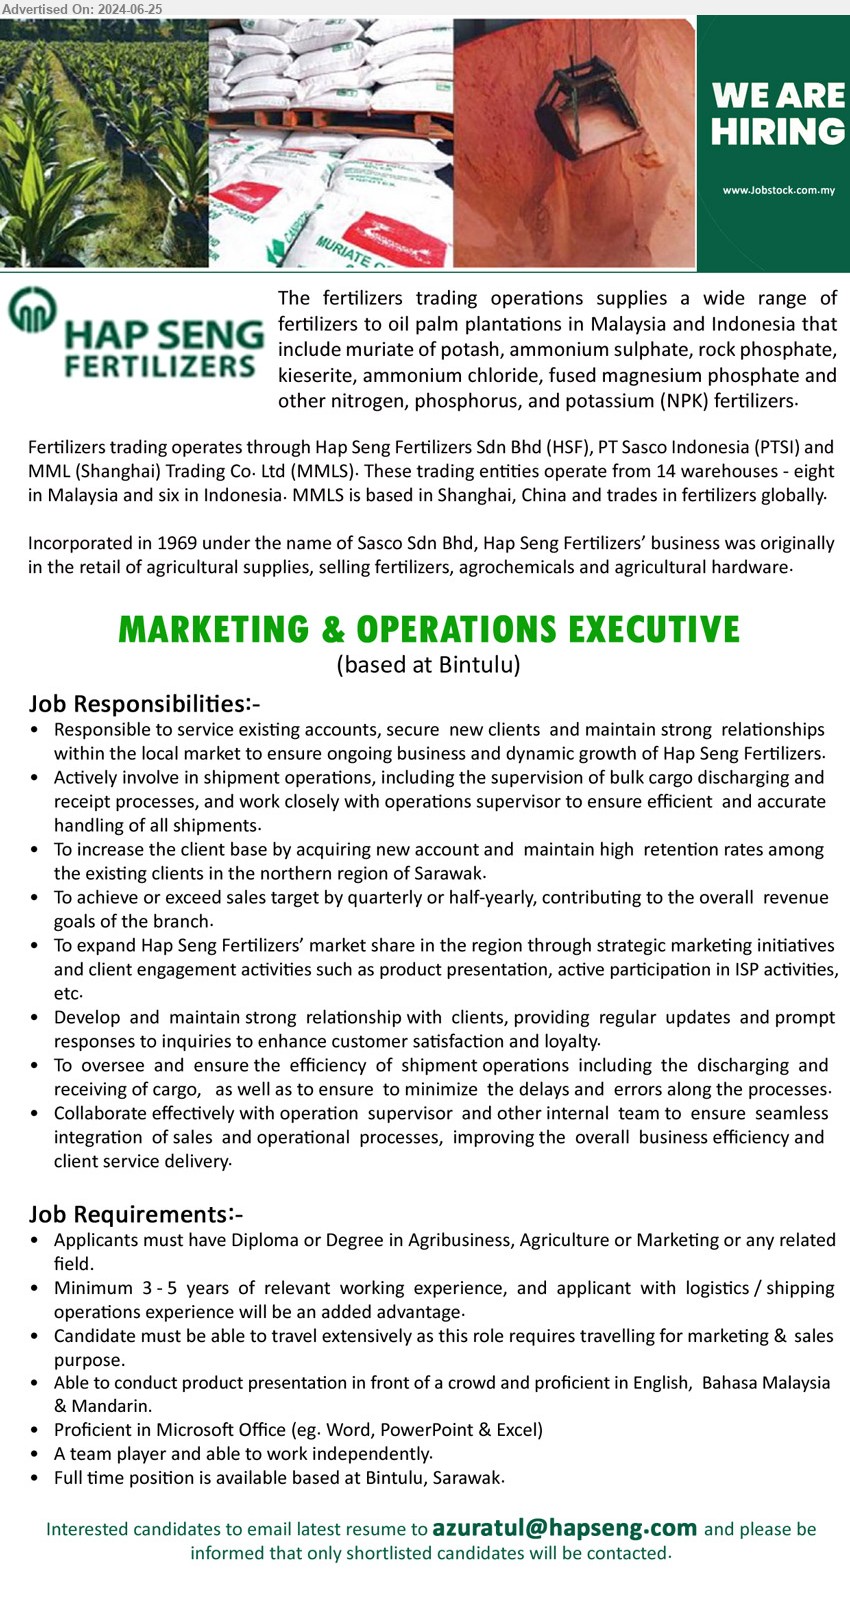 HAP SENG FERTILIZERS SDN BHD - MARKETING & OPERATIONS EXECUTIVE (Bintulu), Diploma or Degree in Agribusiness, Agriculture or Marketing, 3-5 yrs. exp.,...
Email resume to ...